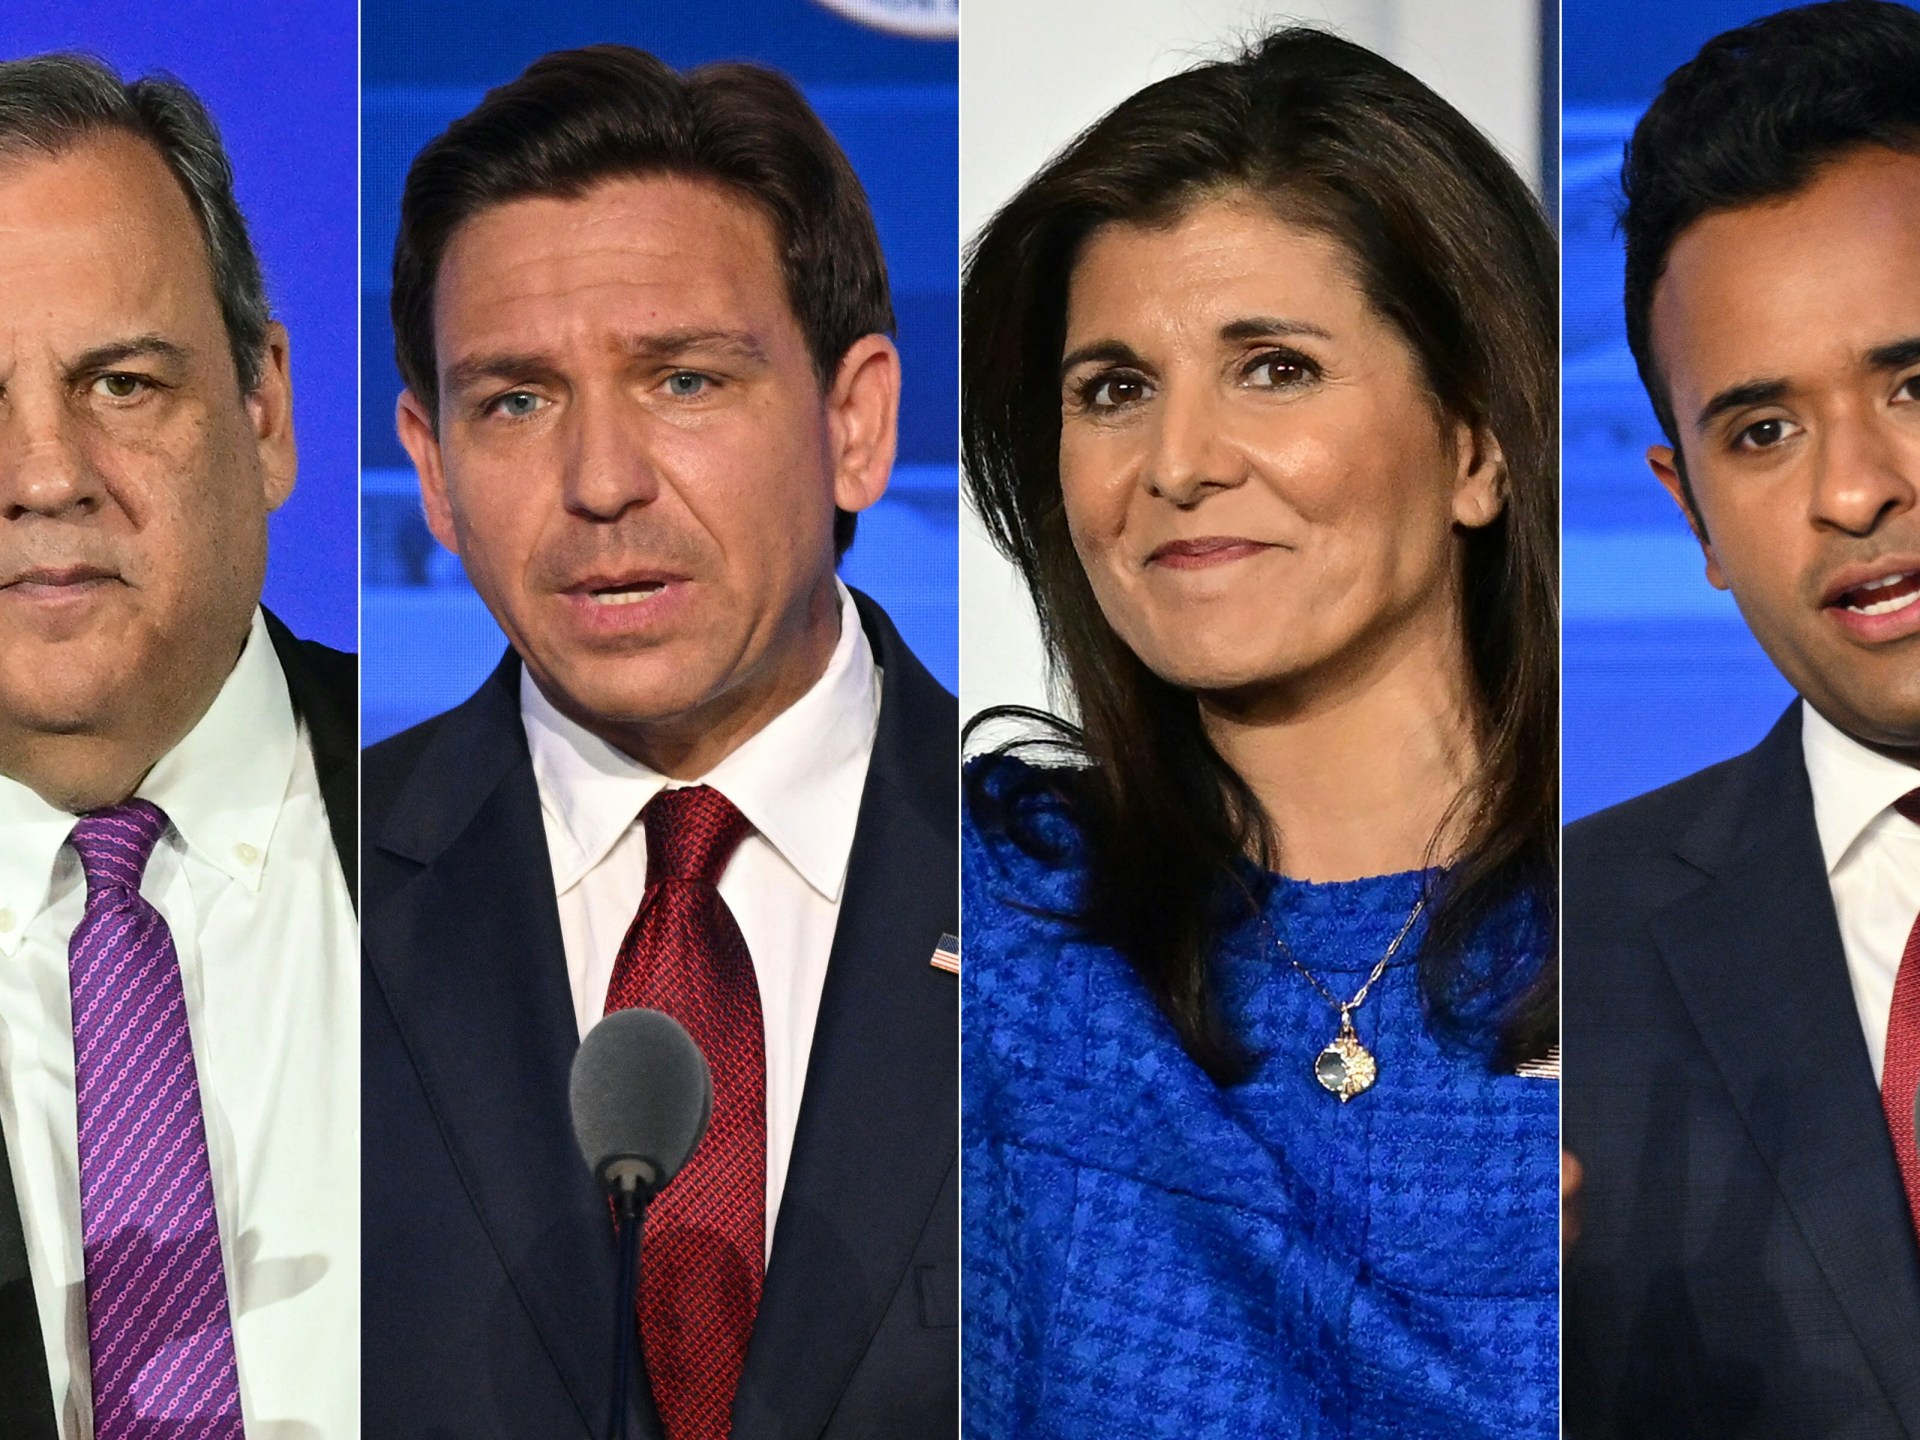 us-presidential-hopefuls-face-off-in-fourth-republican-primary-debate